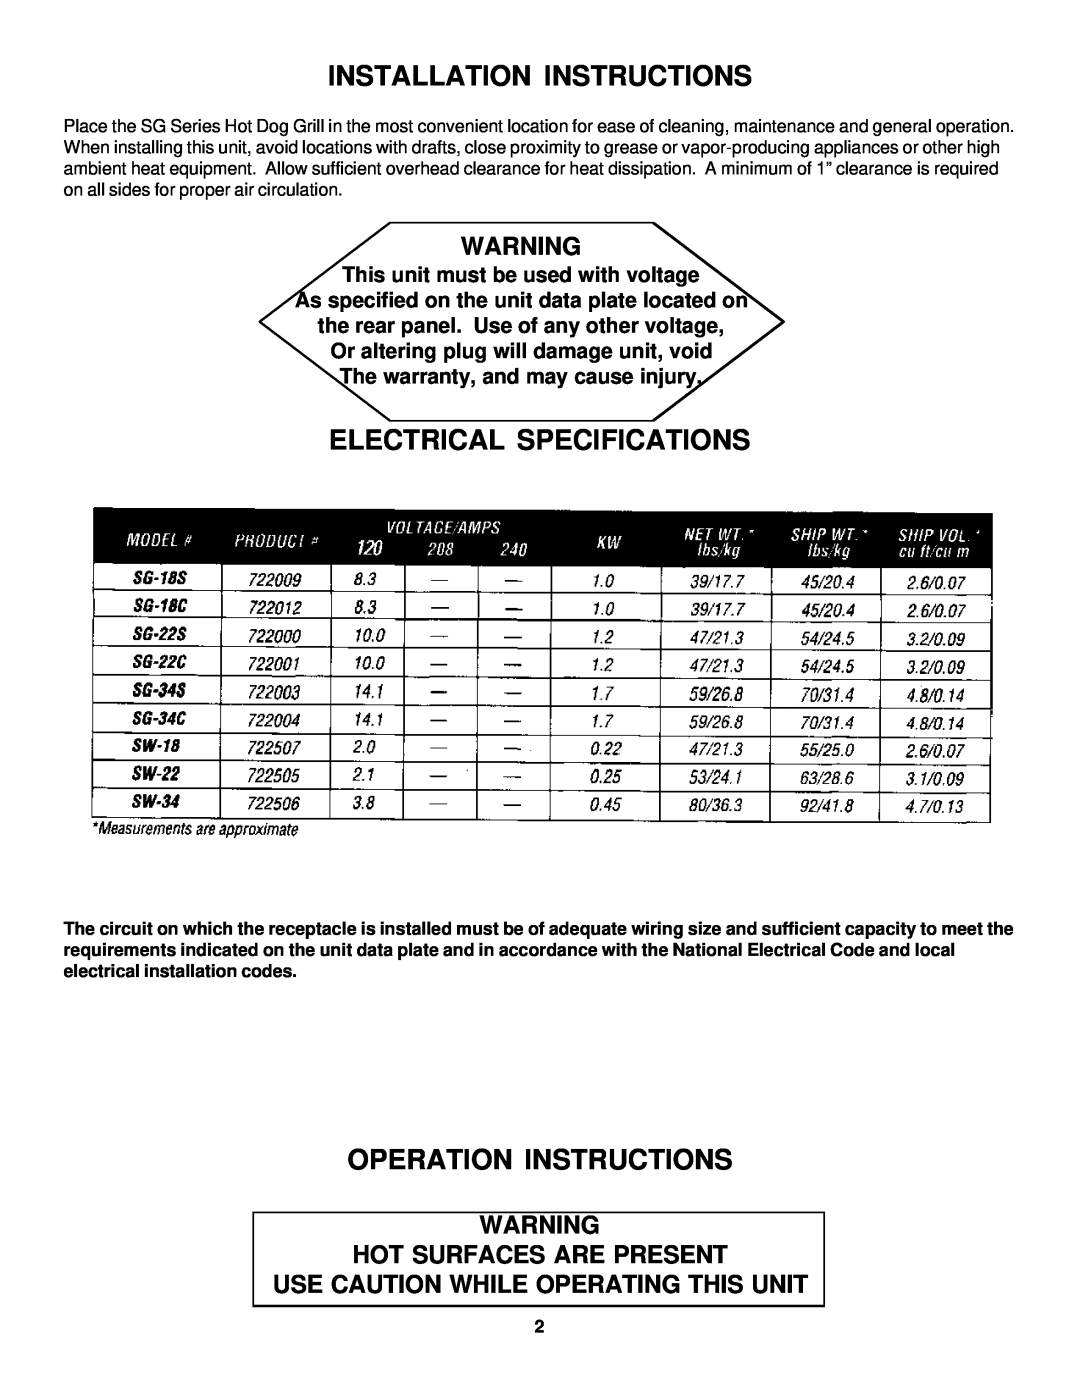 Merco Savory SG Series operation manual Installation Instructions, Electrical Specifications, Operation Instructions 